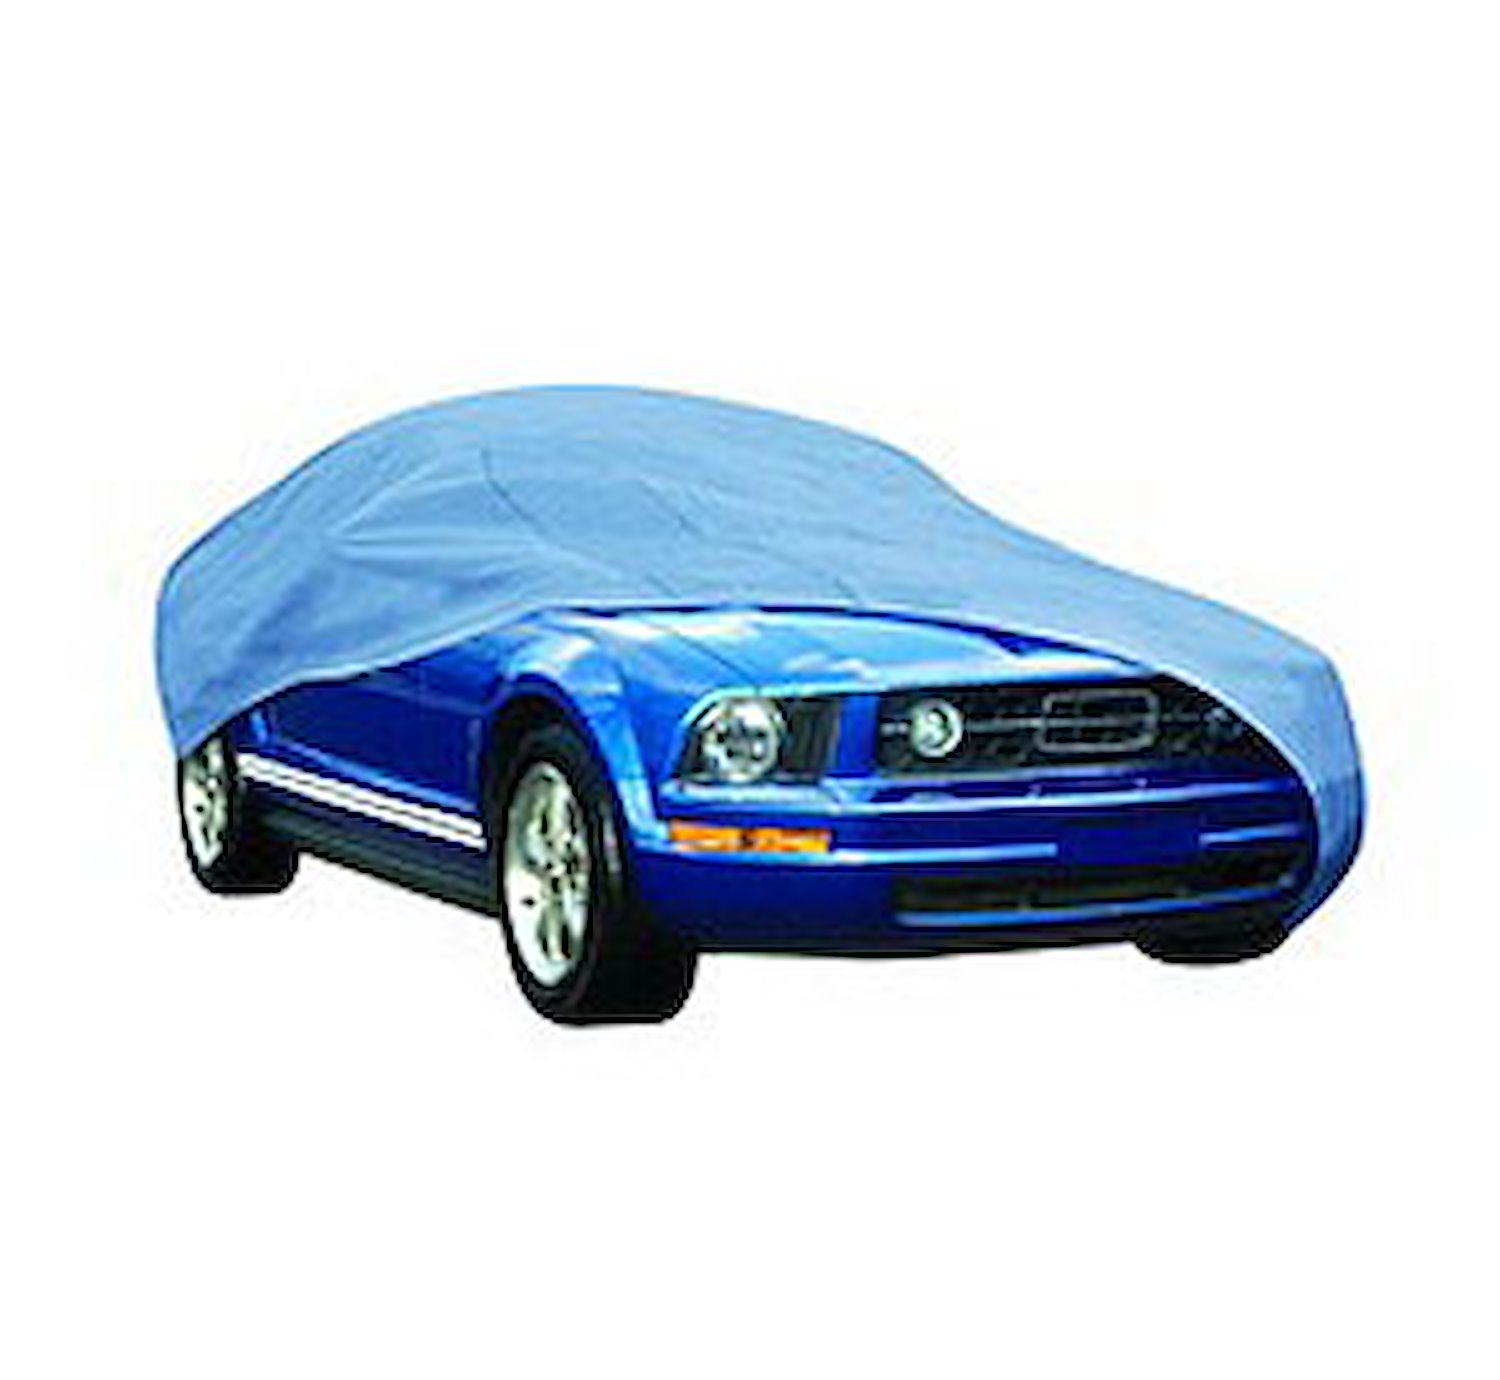 Duro Station Wagon Cover Fits Up To 15" 4" In Length